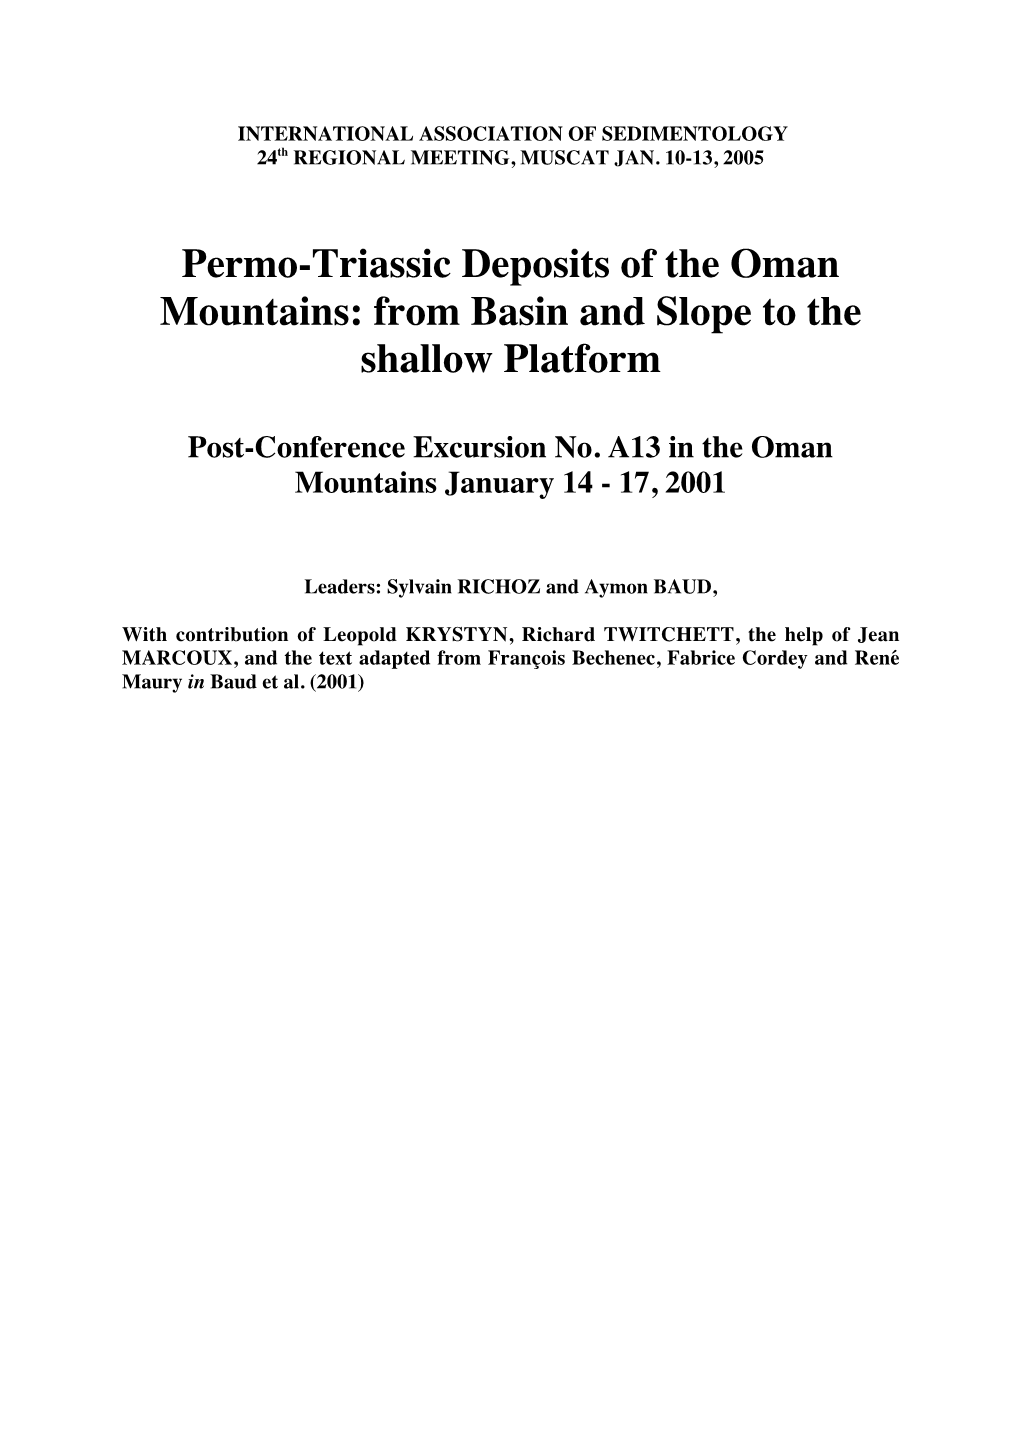 Permo-Triassic Deposits of the Oman Mountains: from Basin and Slope to the Shallow Platform